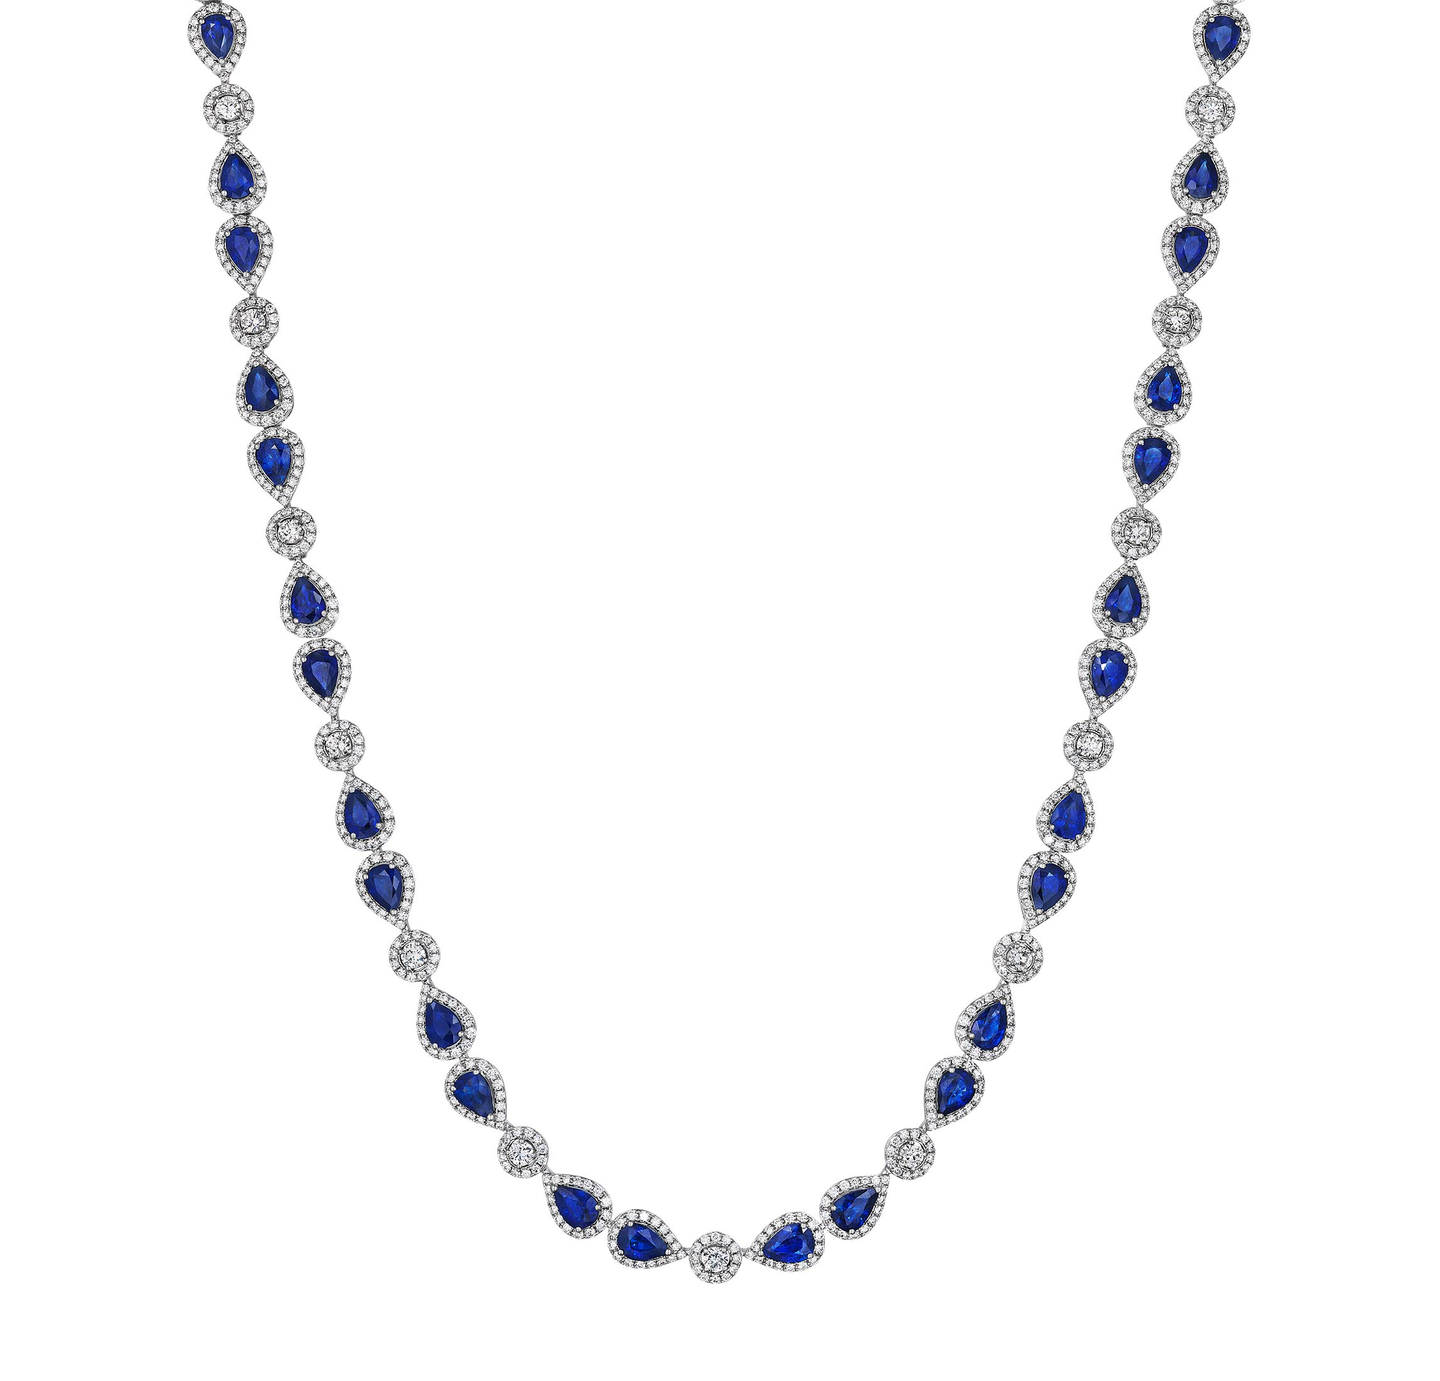 Sabel Collection White Gold Pear Shape Sapphire and Diamond Necklace